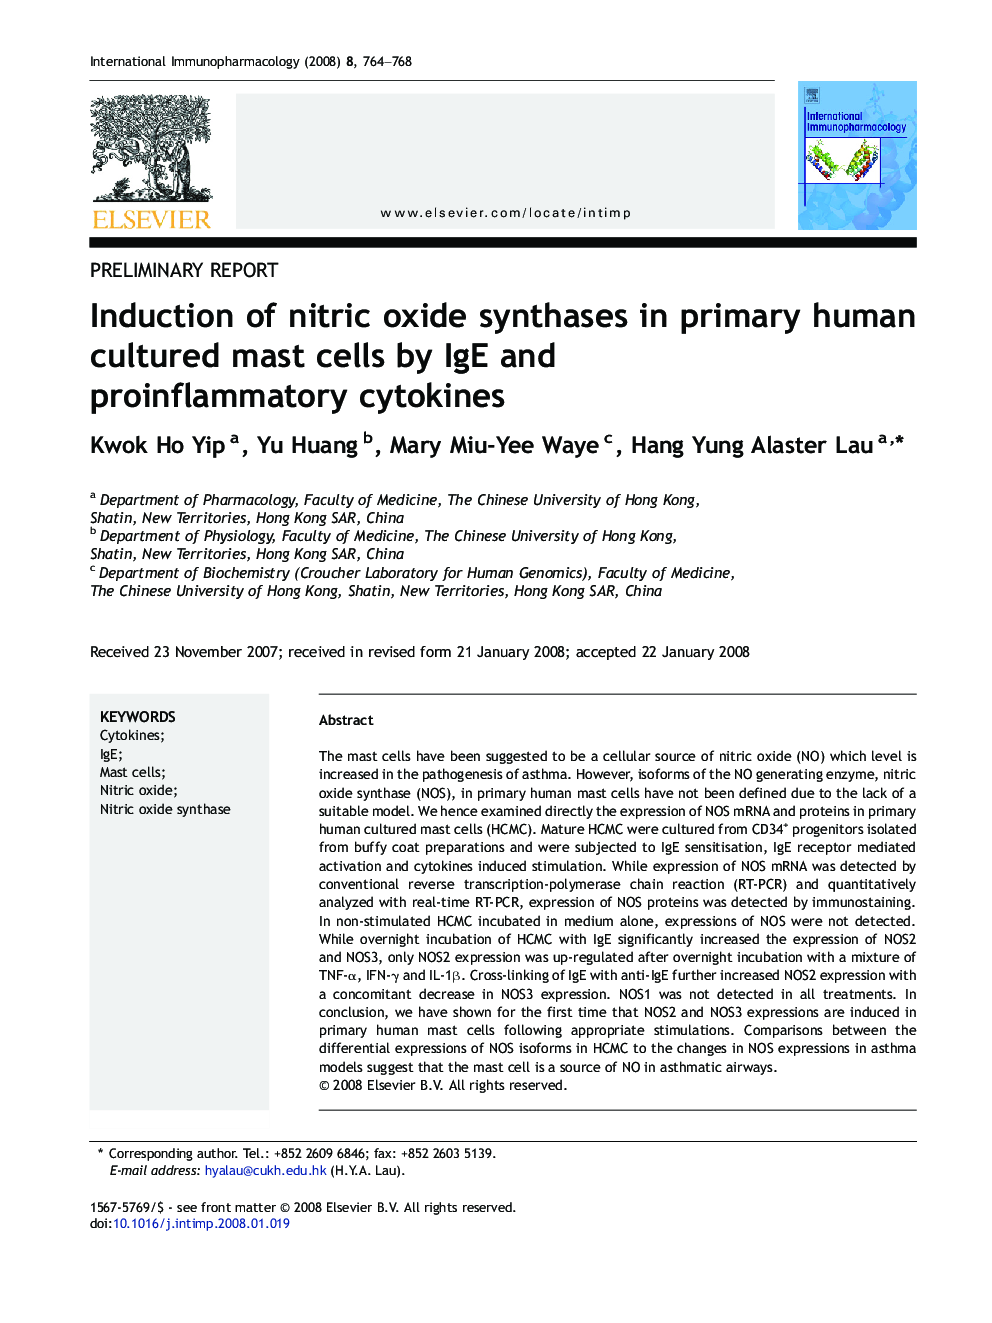 Induction of nitric oxide synthases in primary human cultured mast cells by IgE and proinflammatory cytokines